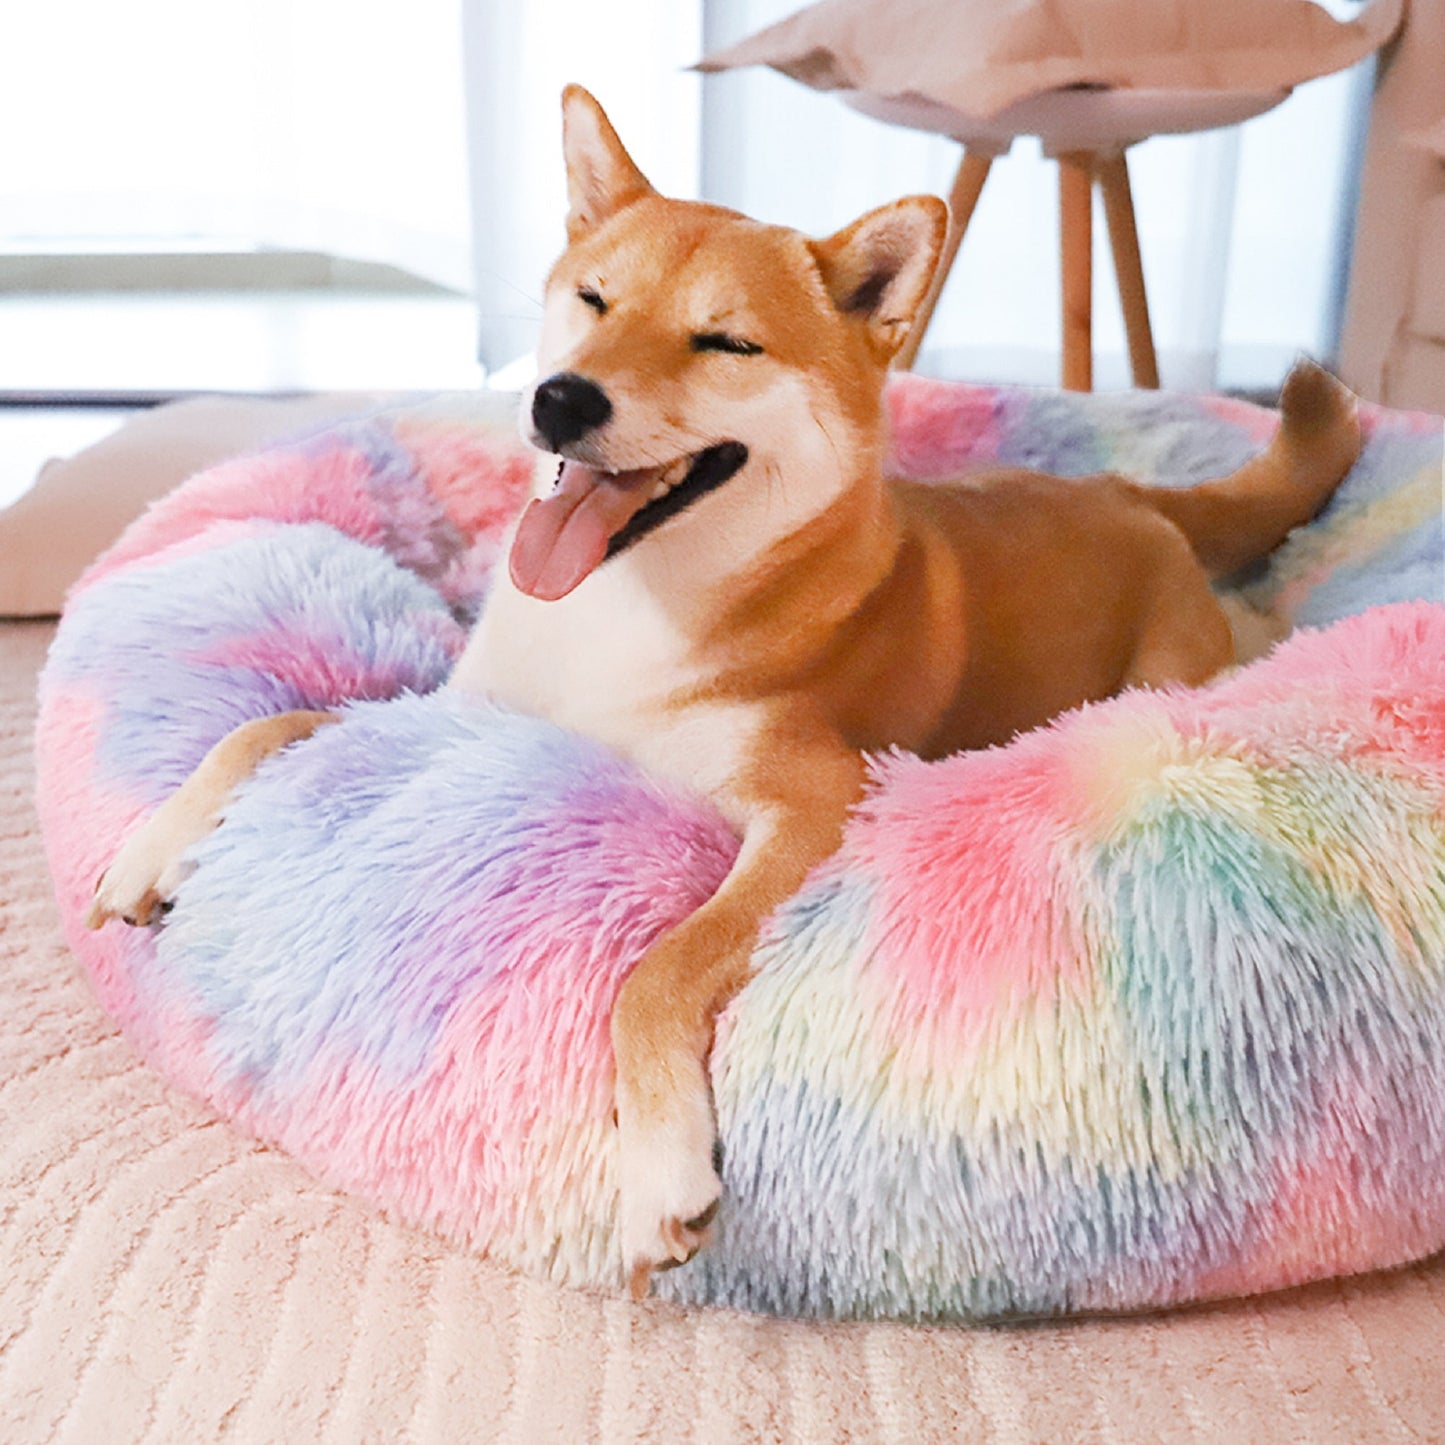 Calming Donut Dog Bed for Small Medium and Large dogs Anti-Anxiety Plush Soft and Cozy Cat Bed 36 inches Warming Pet Bed for Winter and Fall(Pink Rainbow)